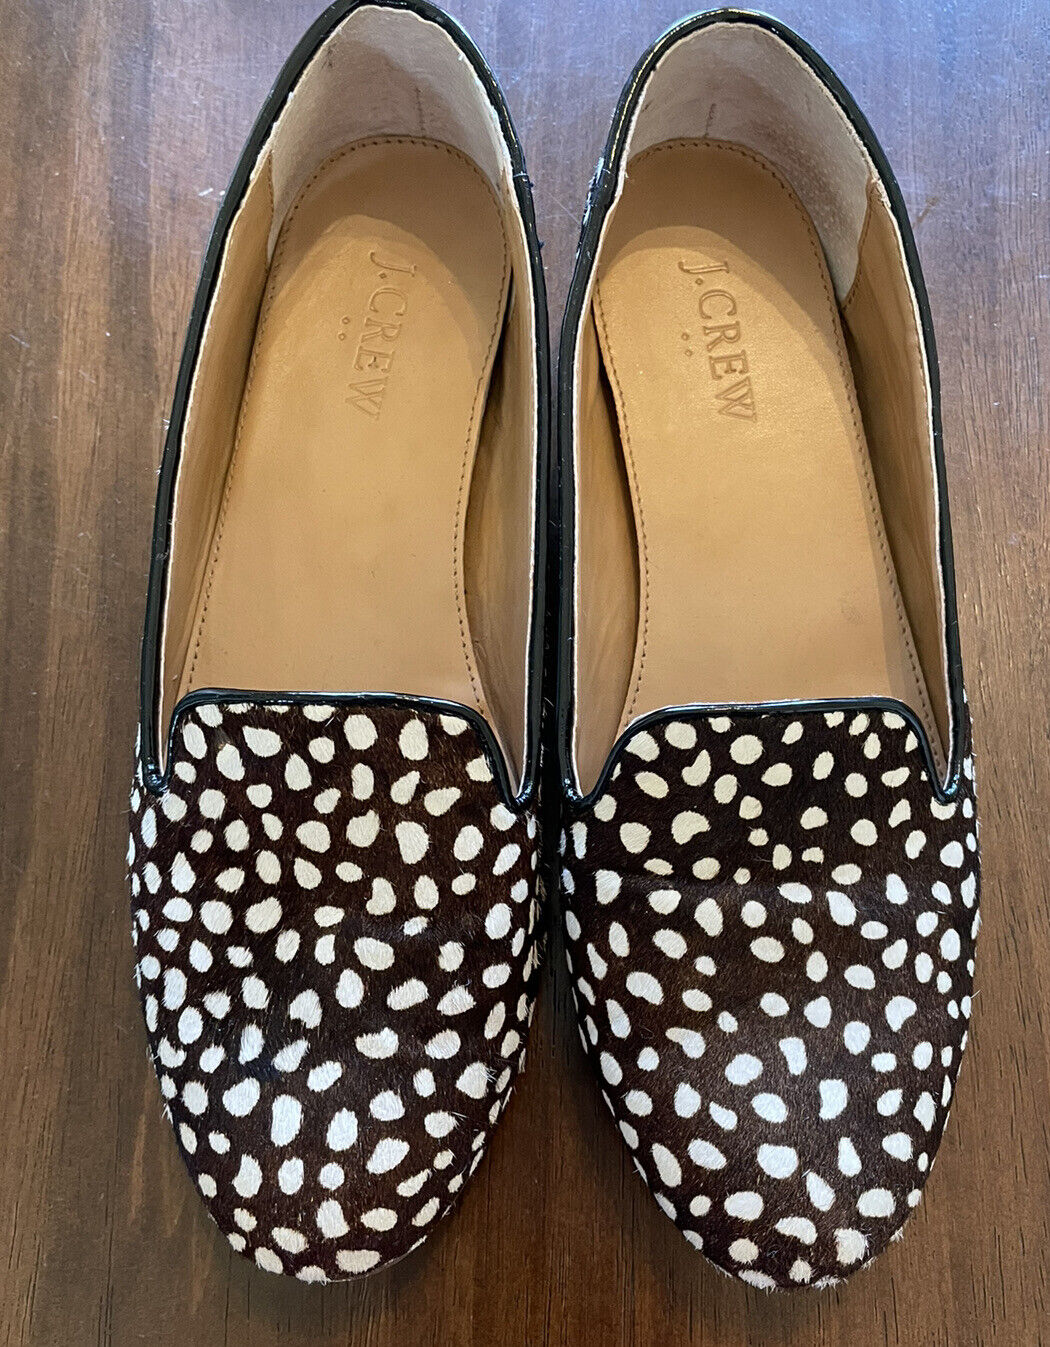 J Crew Darby Calf Hair Loafers Size 6.5 Flats Slip On Shoes 